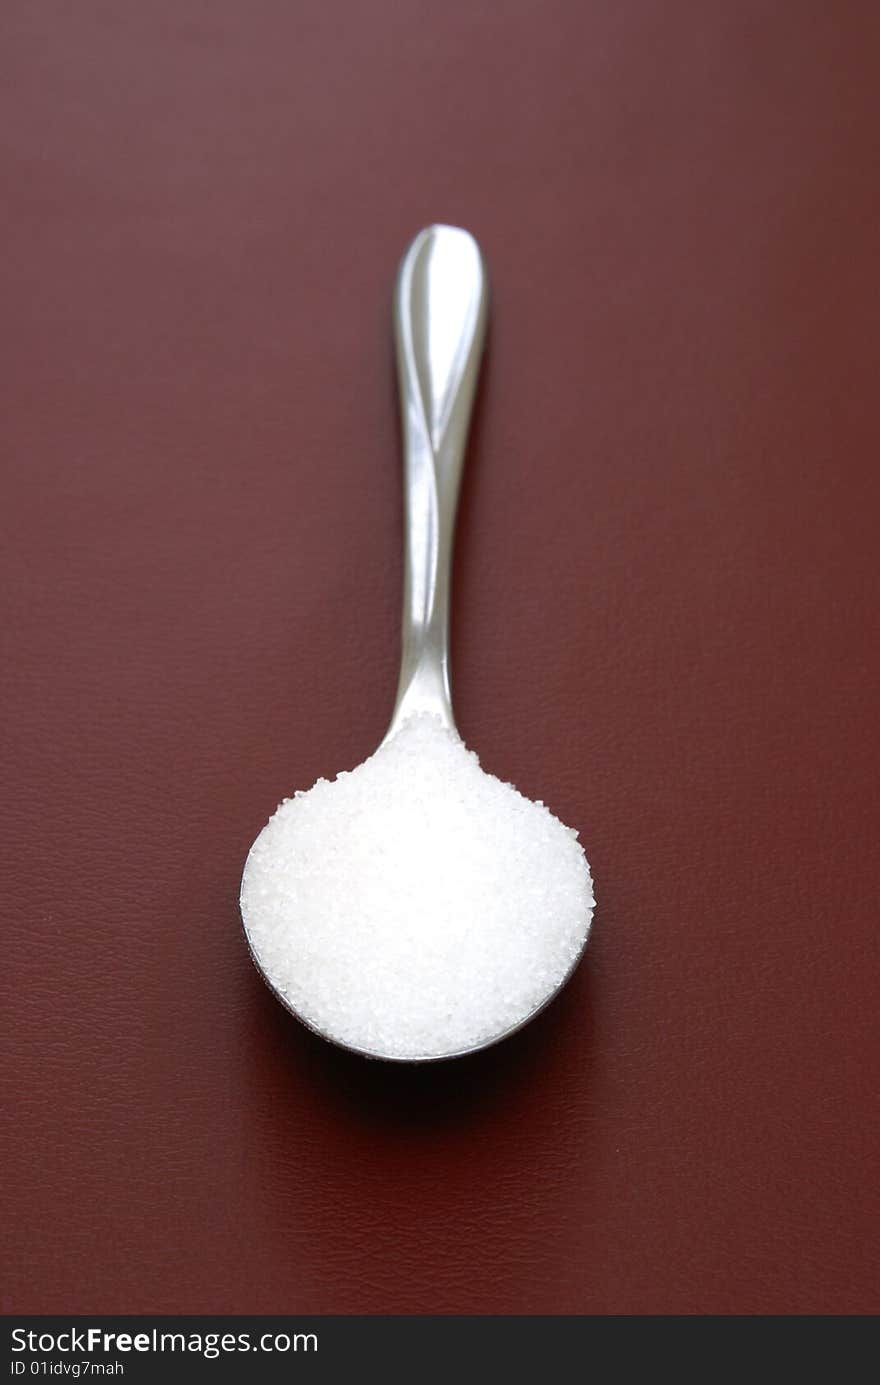 A teaspoon of sugar on red background.